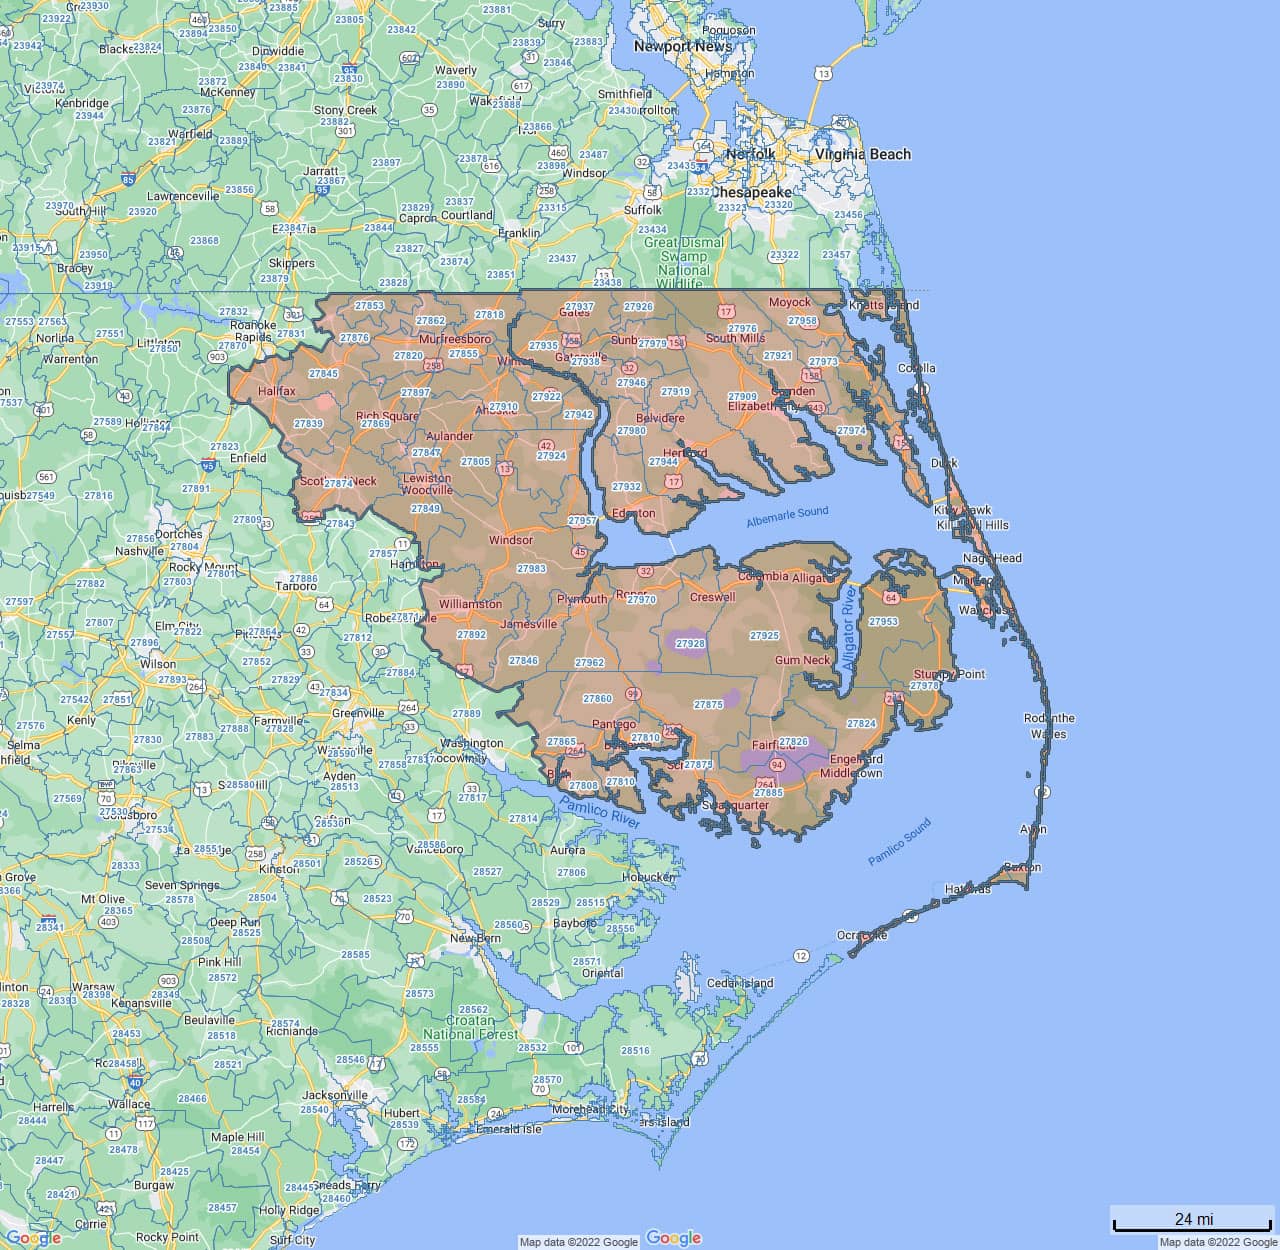 All Dry Services Area Coverage Map for Outer Banks, NC